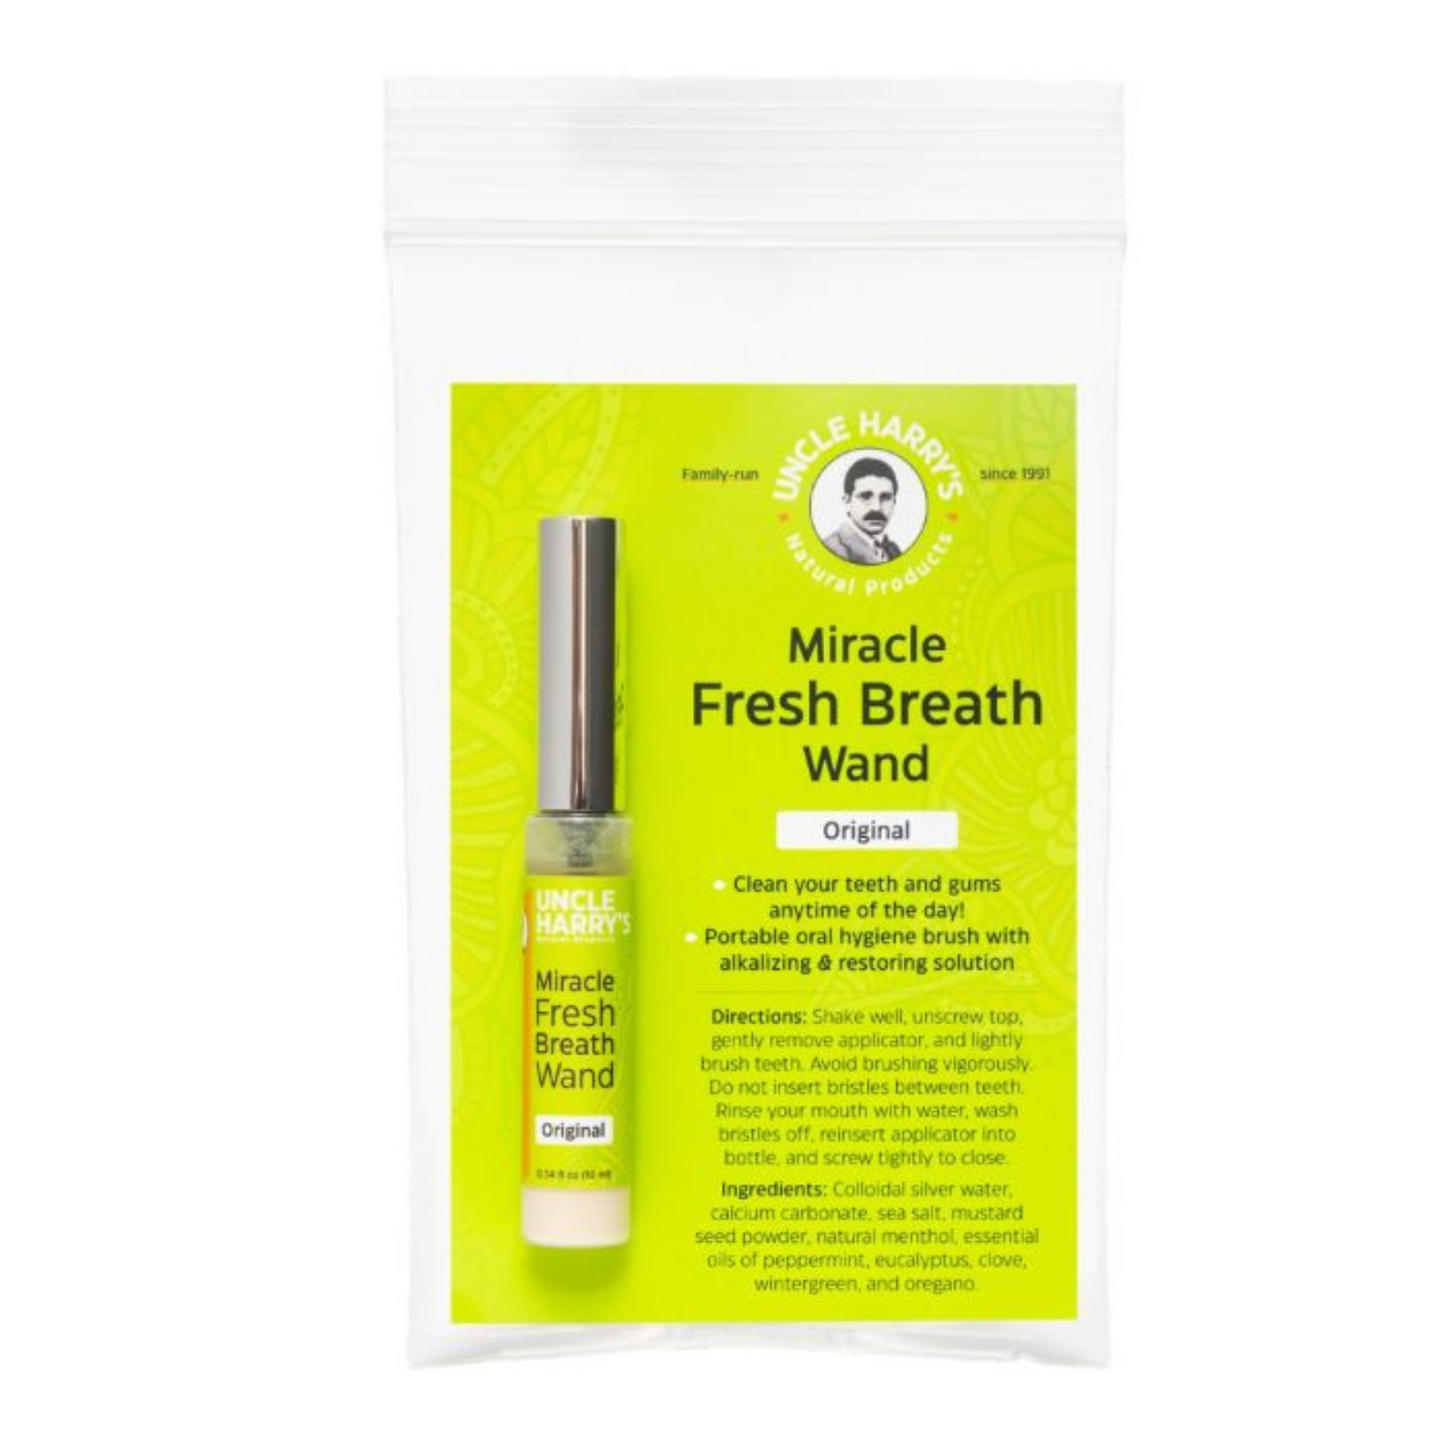 Primary image of Miracle Fresh Breath Wand